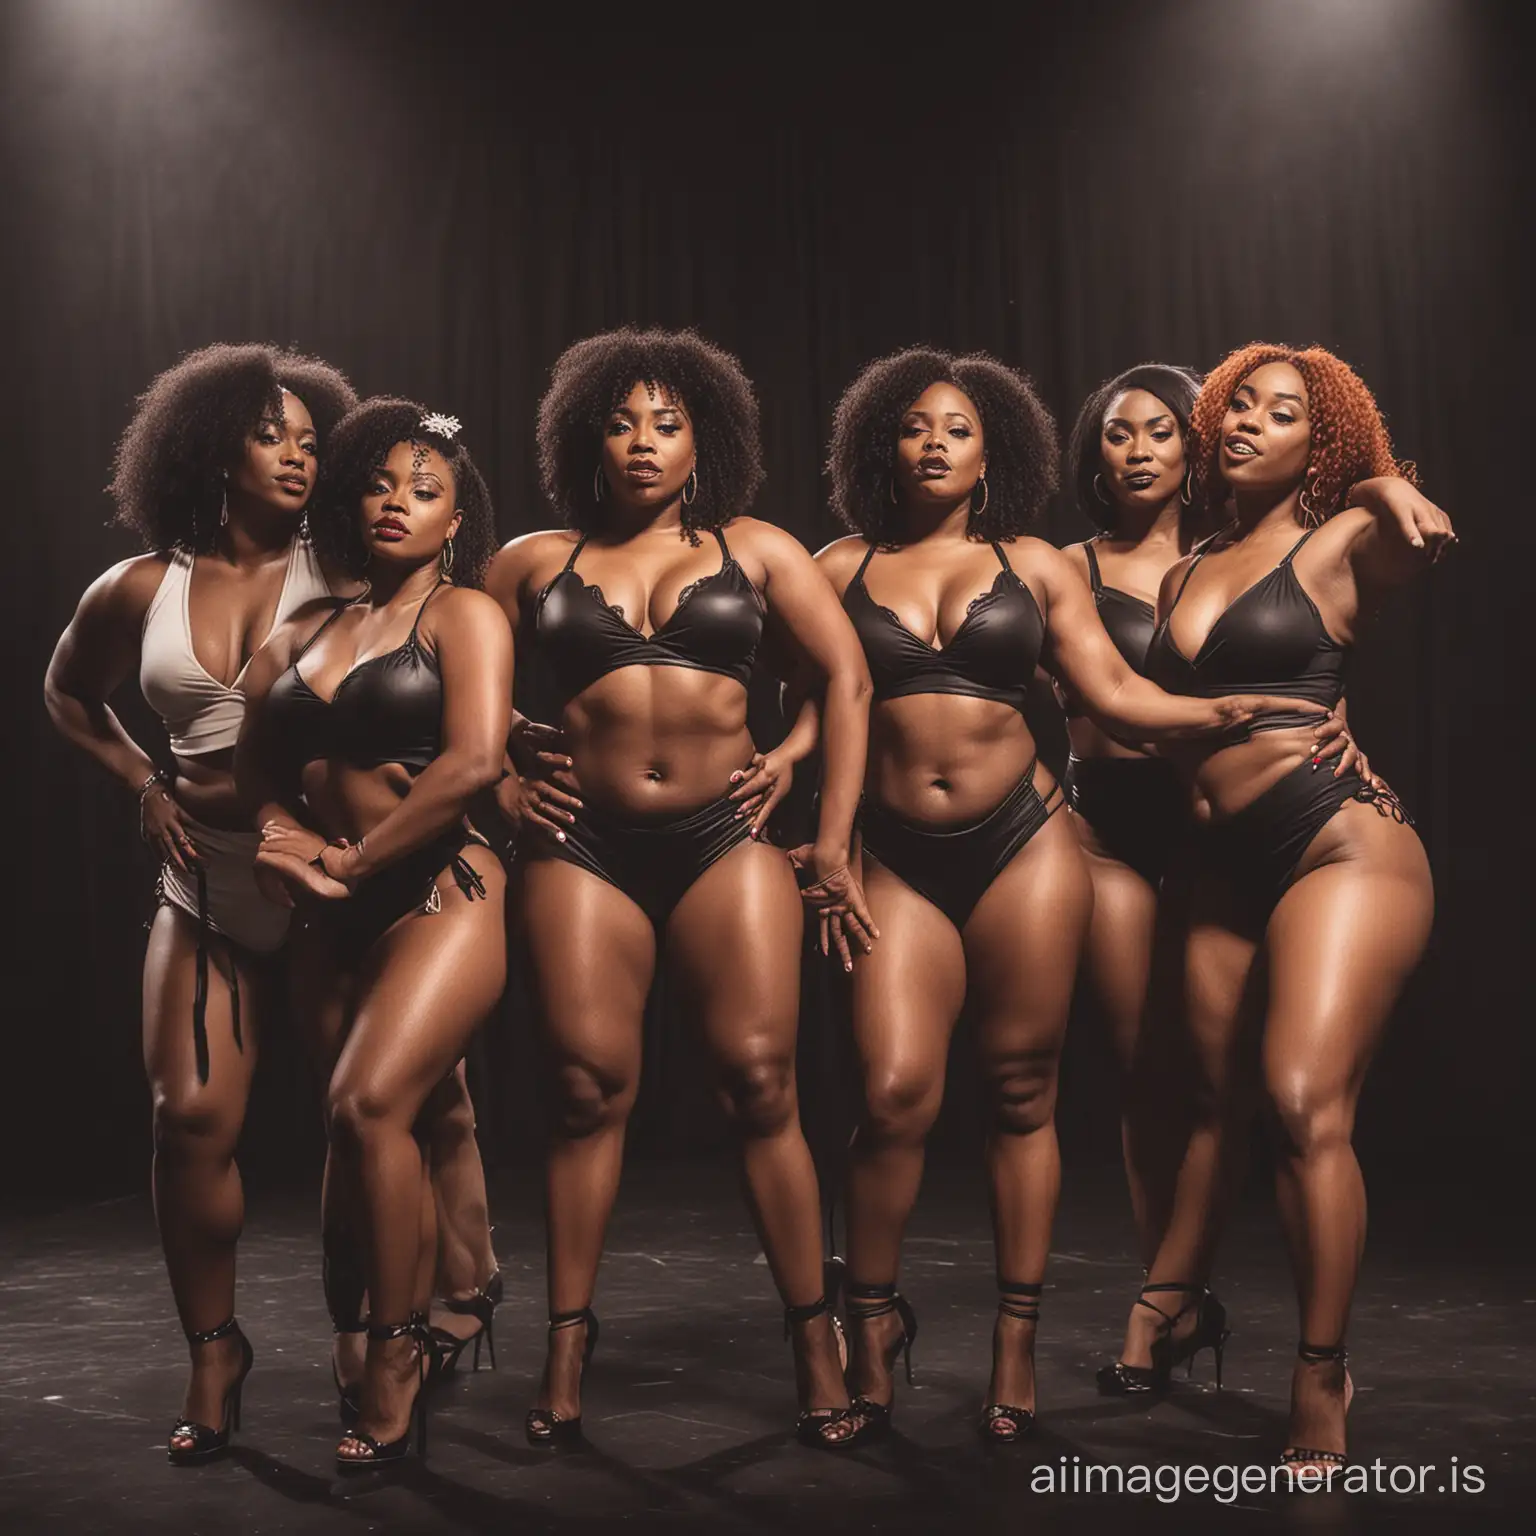 Sultry-NeoSoul-Circus-Erotic-Cirque-with-Curvy-Black-Women